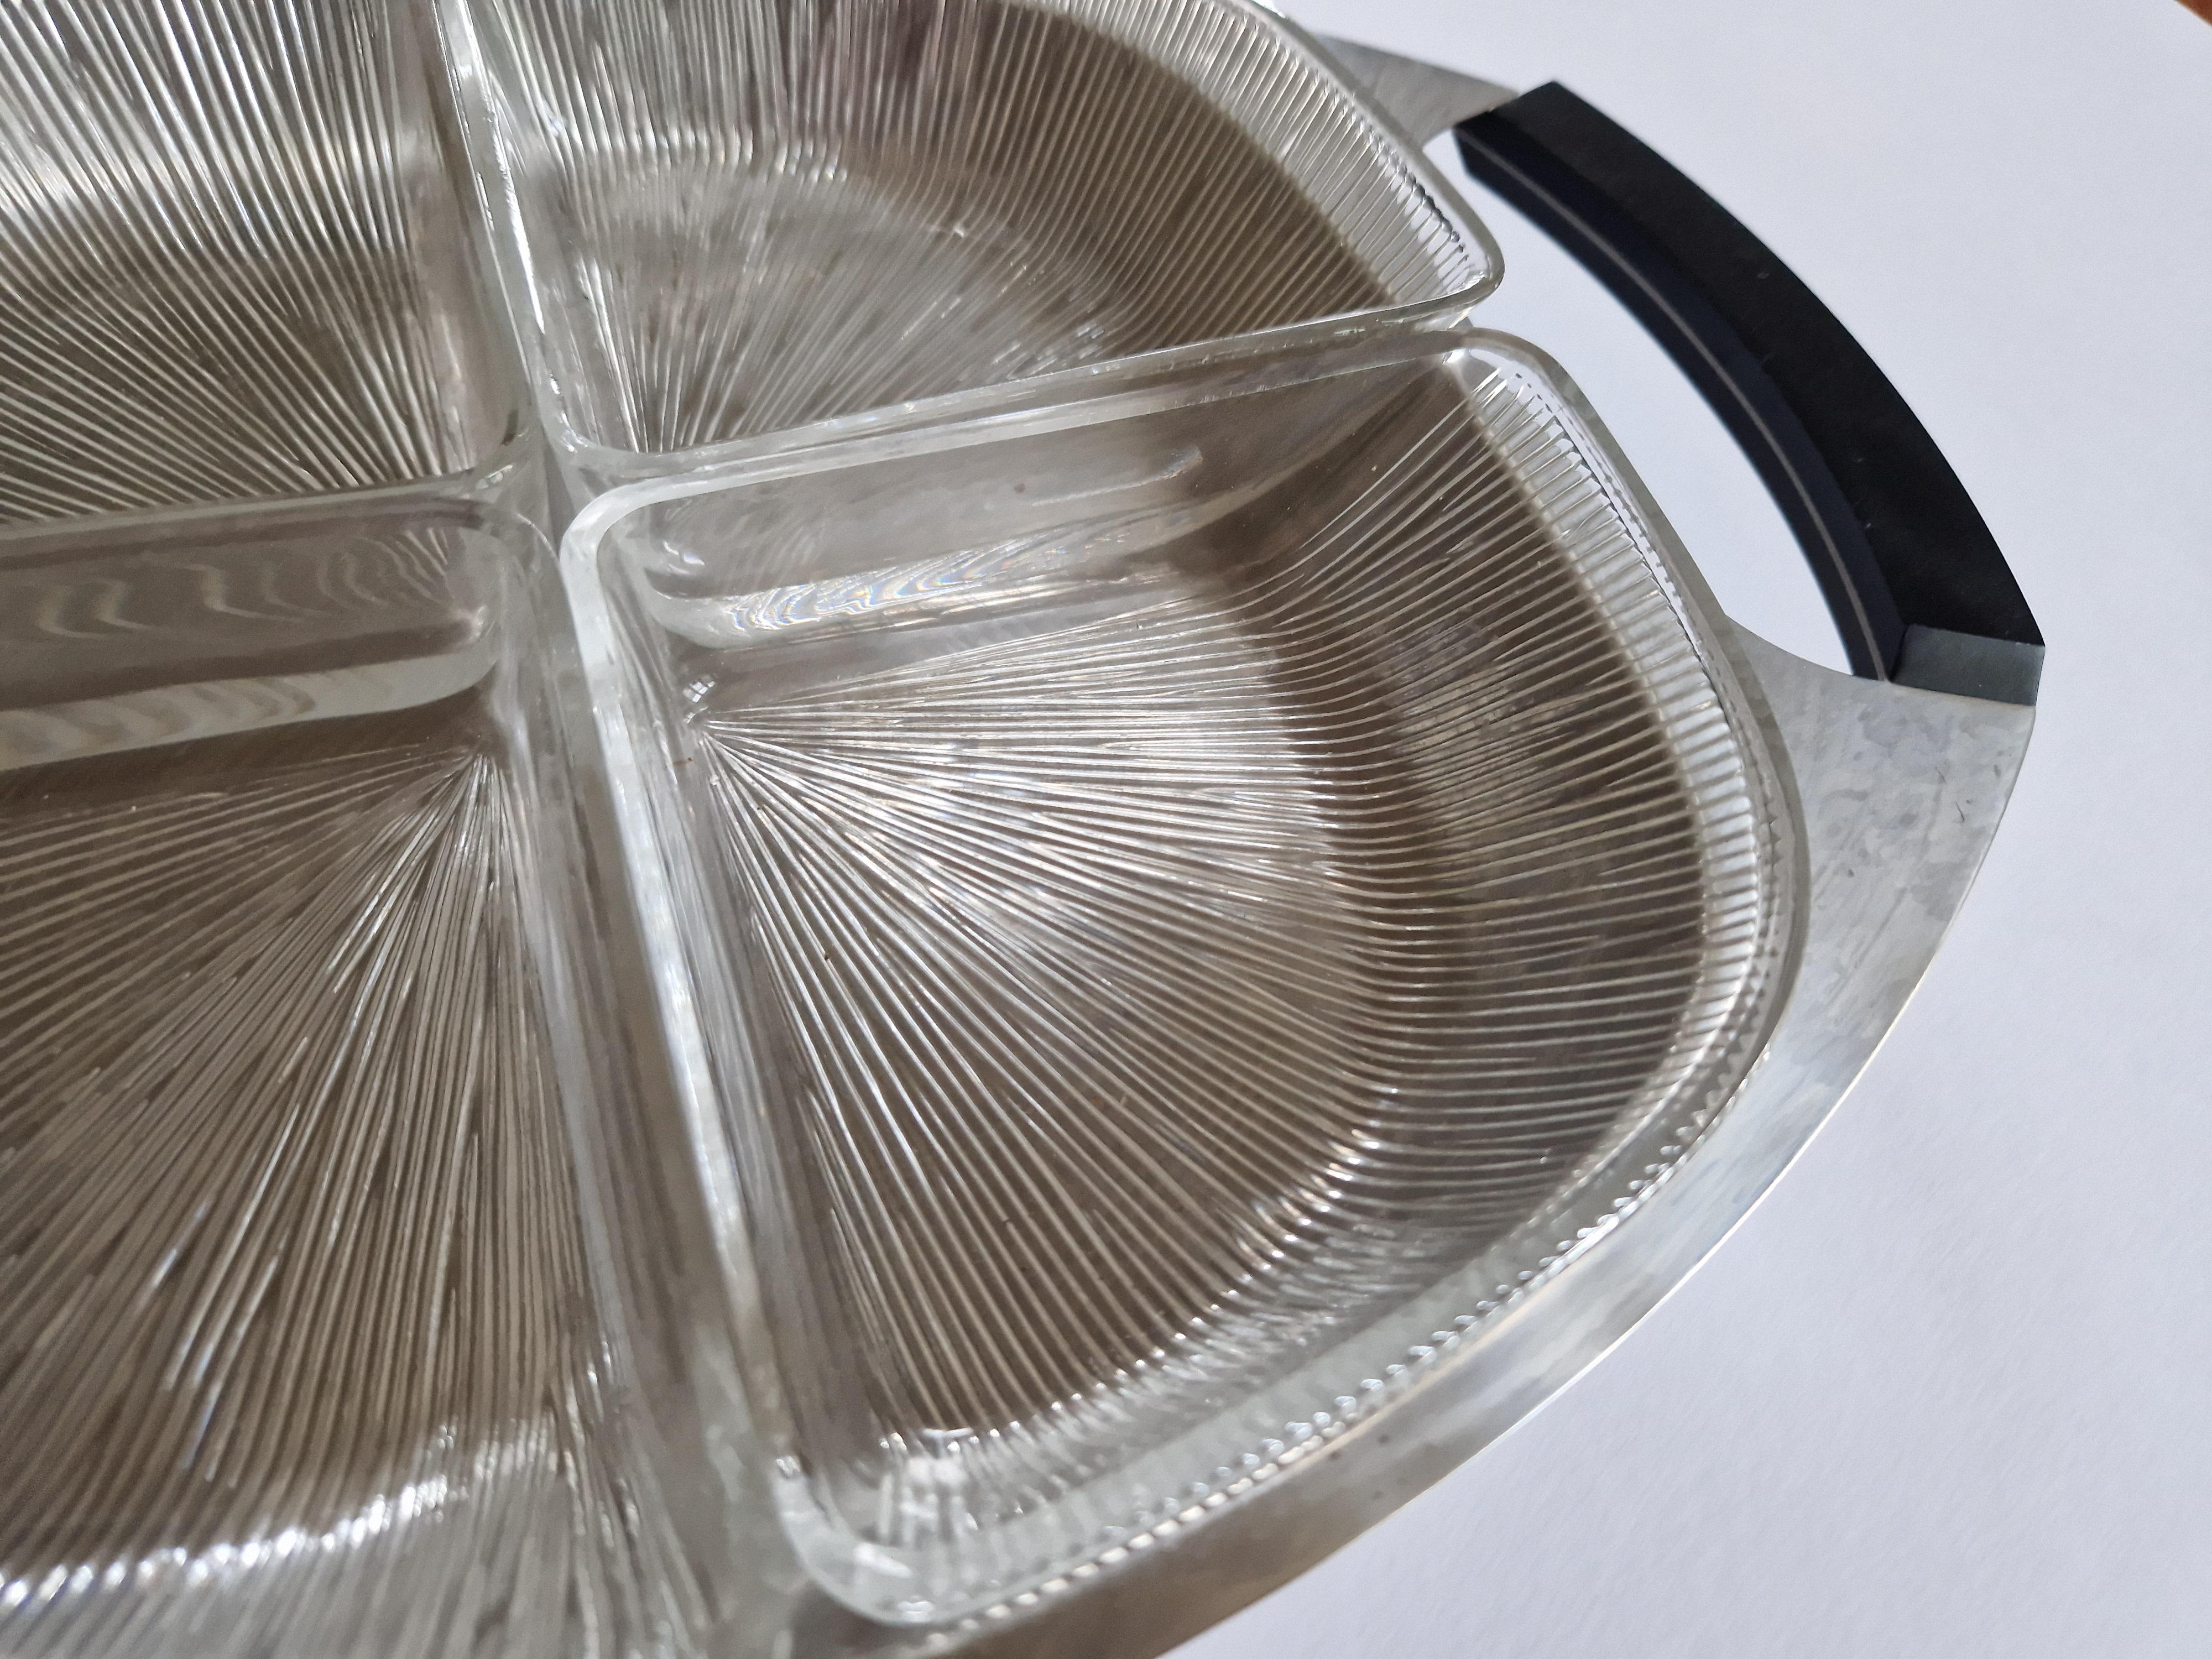 Midcentury Serving Plate Stainless Steel and Glass Cromargan, Germany, 1970s For Sale 2